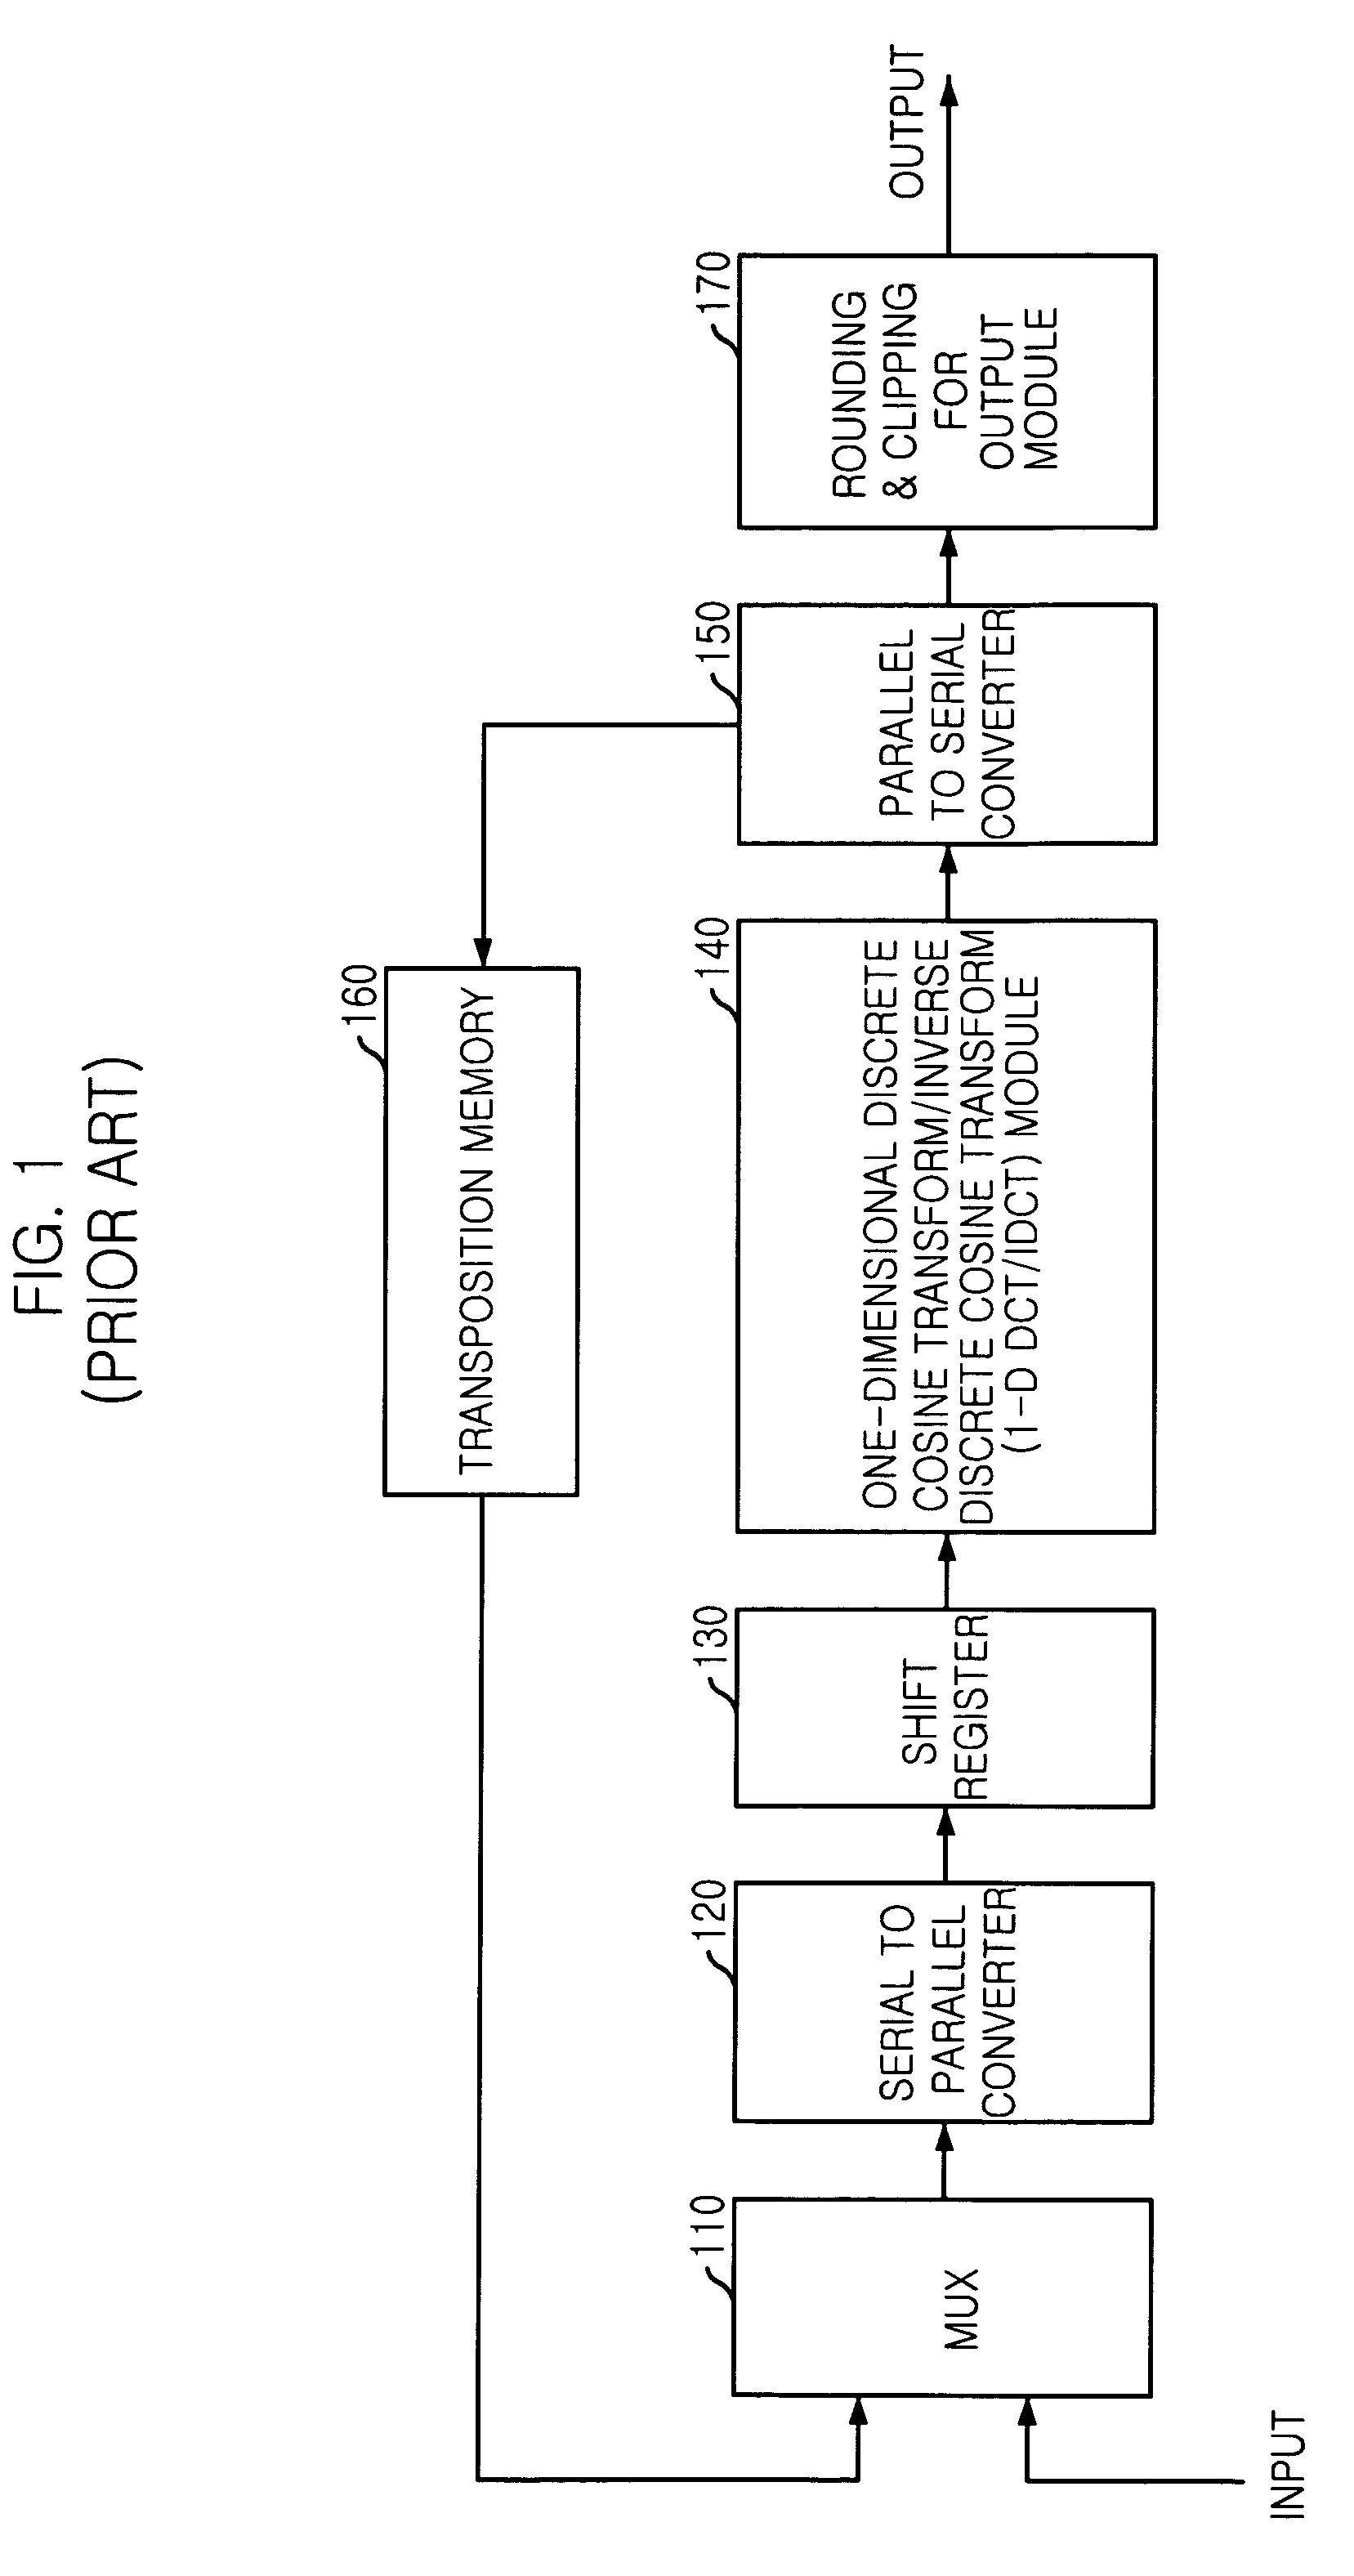 Apparatus and method for 2-D discrete transform using distributed arithmetic module